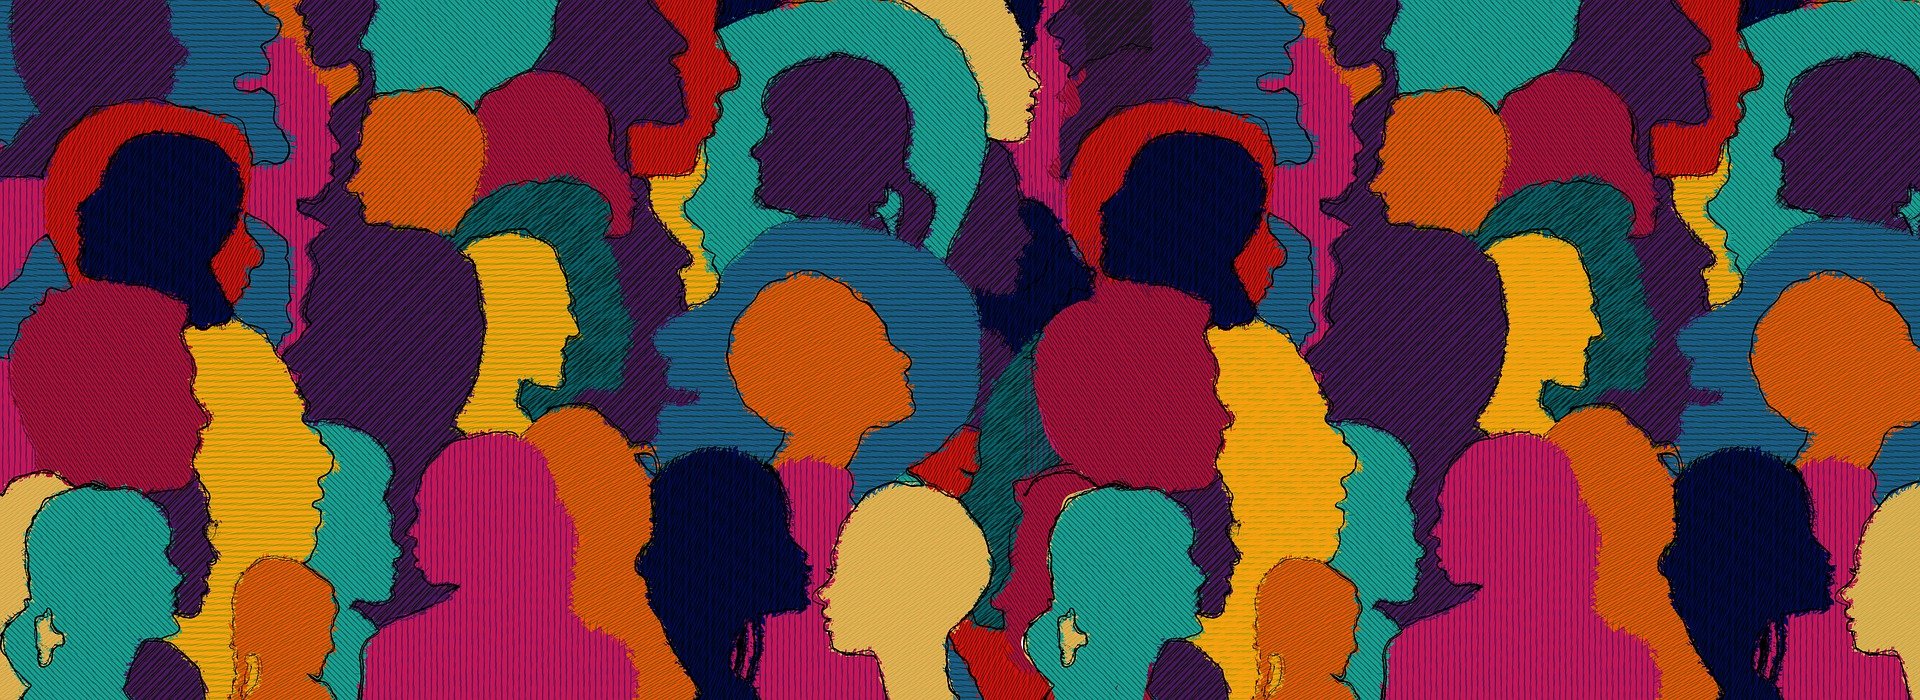 Illustration showing lots of different people's profiles in multi-colours in a collage